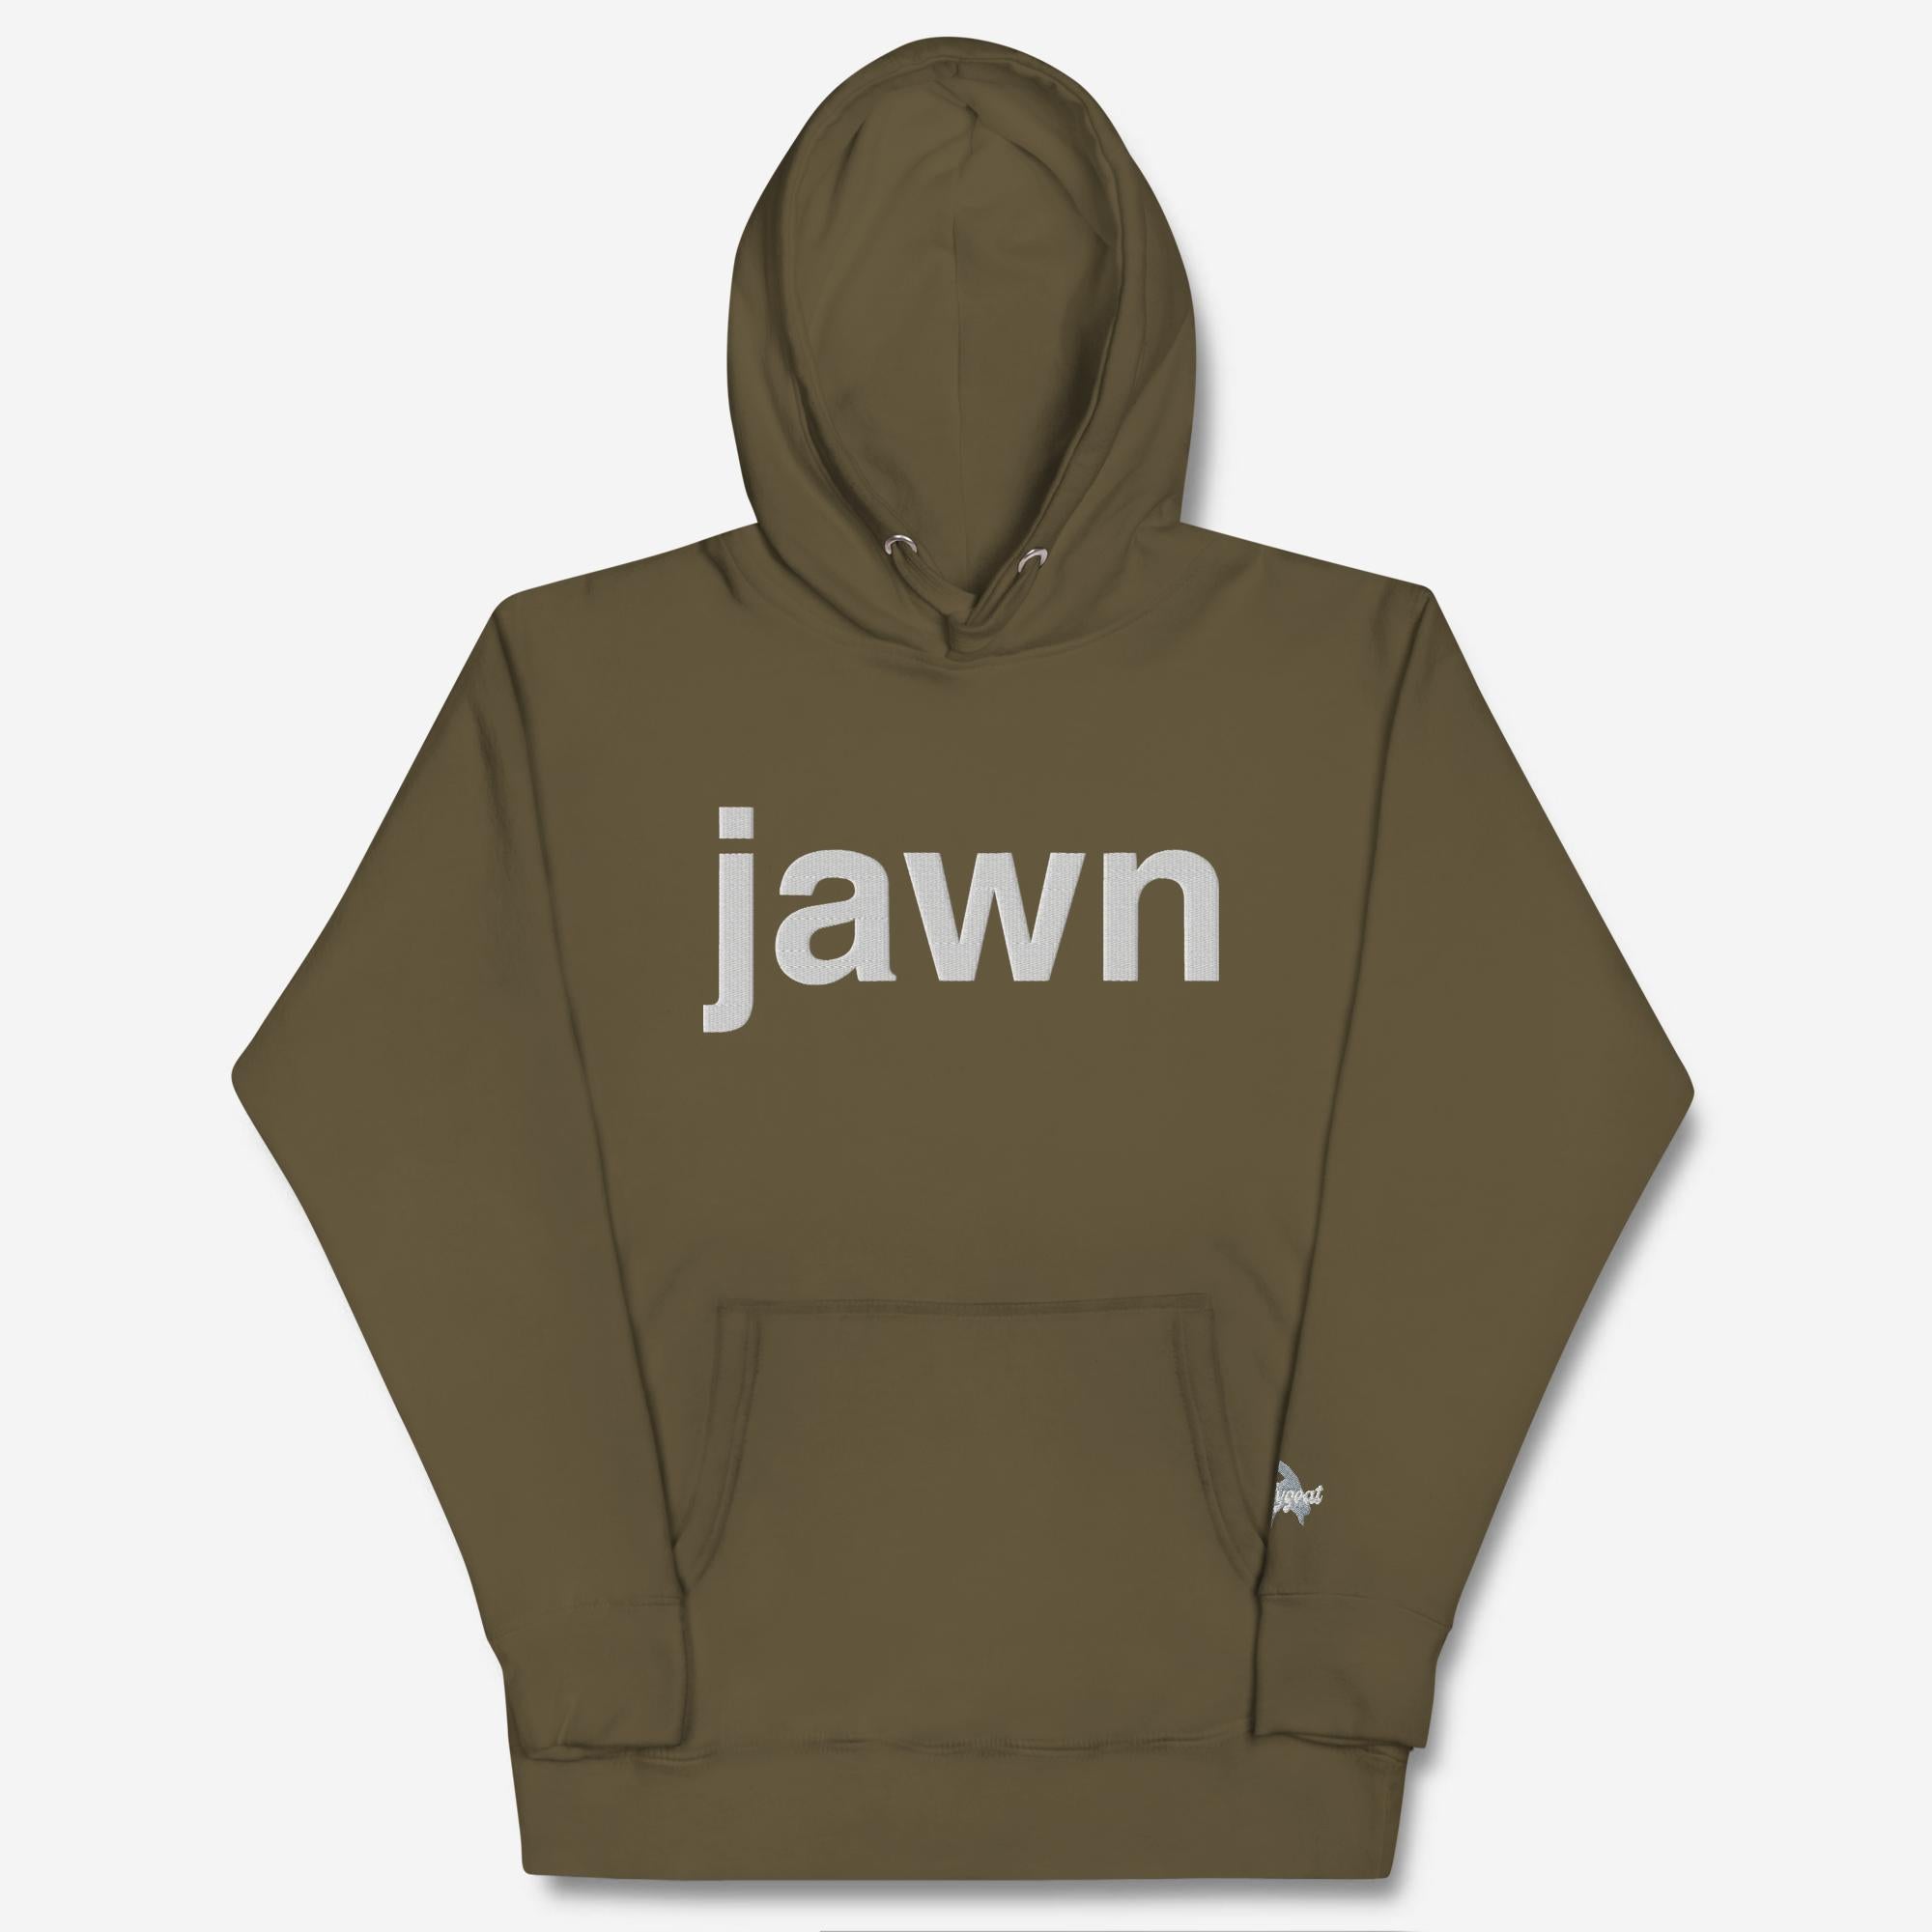 "Helvetica Jawn" Embroidered Hoodie